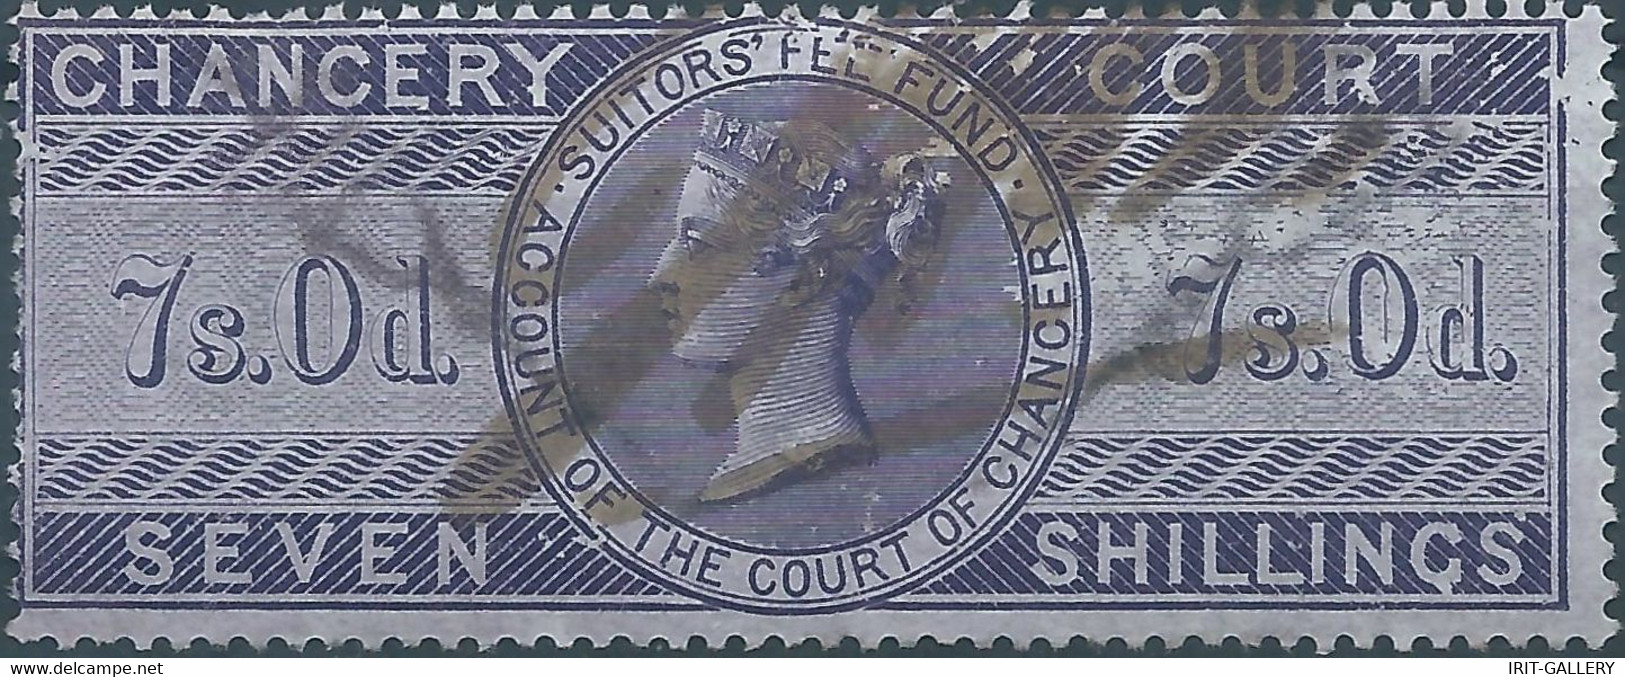 Great Britain-ENGLAND,Queen Victoria,1855 /1870 Revenue Stamp Tax Fiscal CHANCERY COURT,7s.0d. Seven Shillings,Used - Revenue Stamps